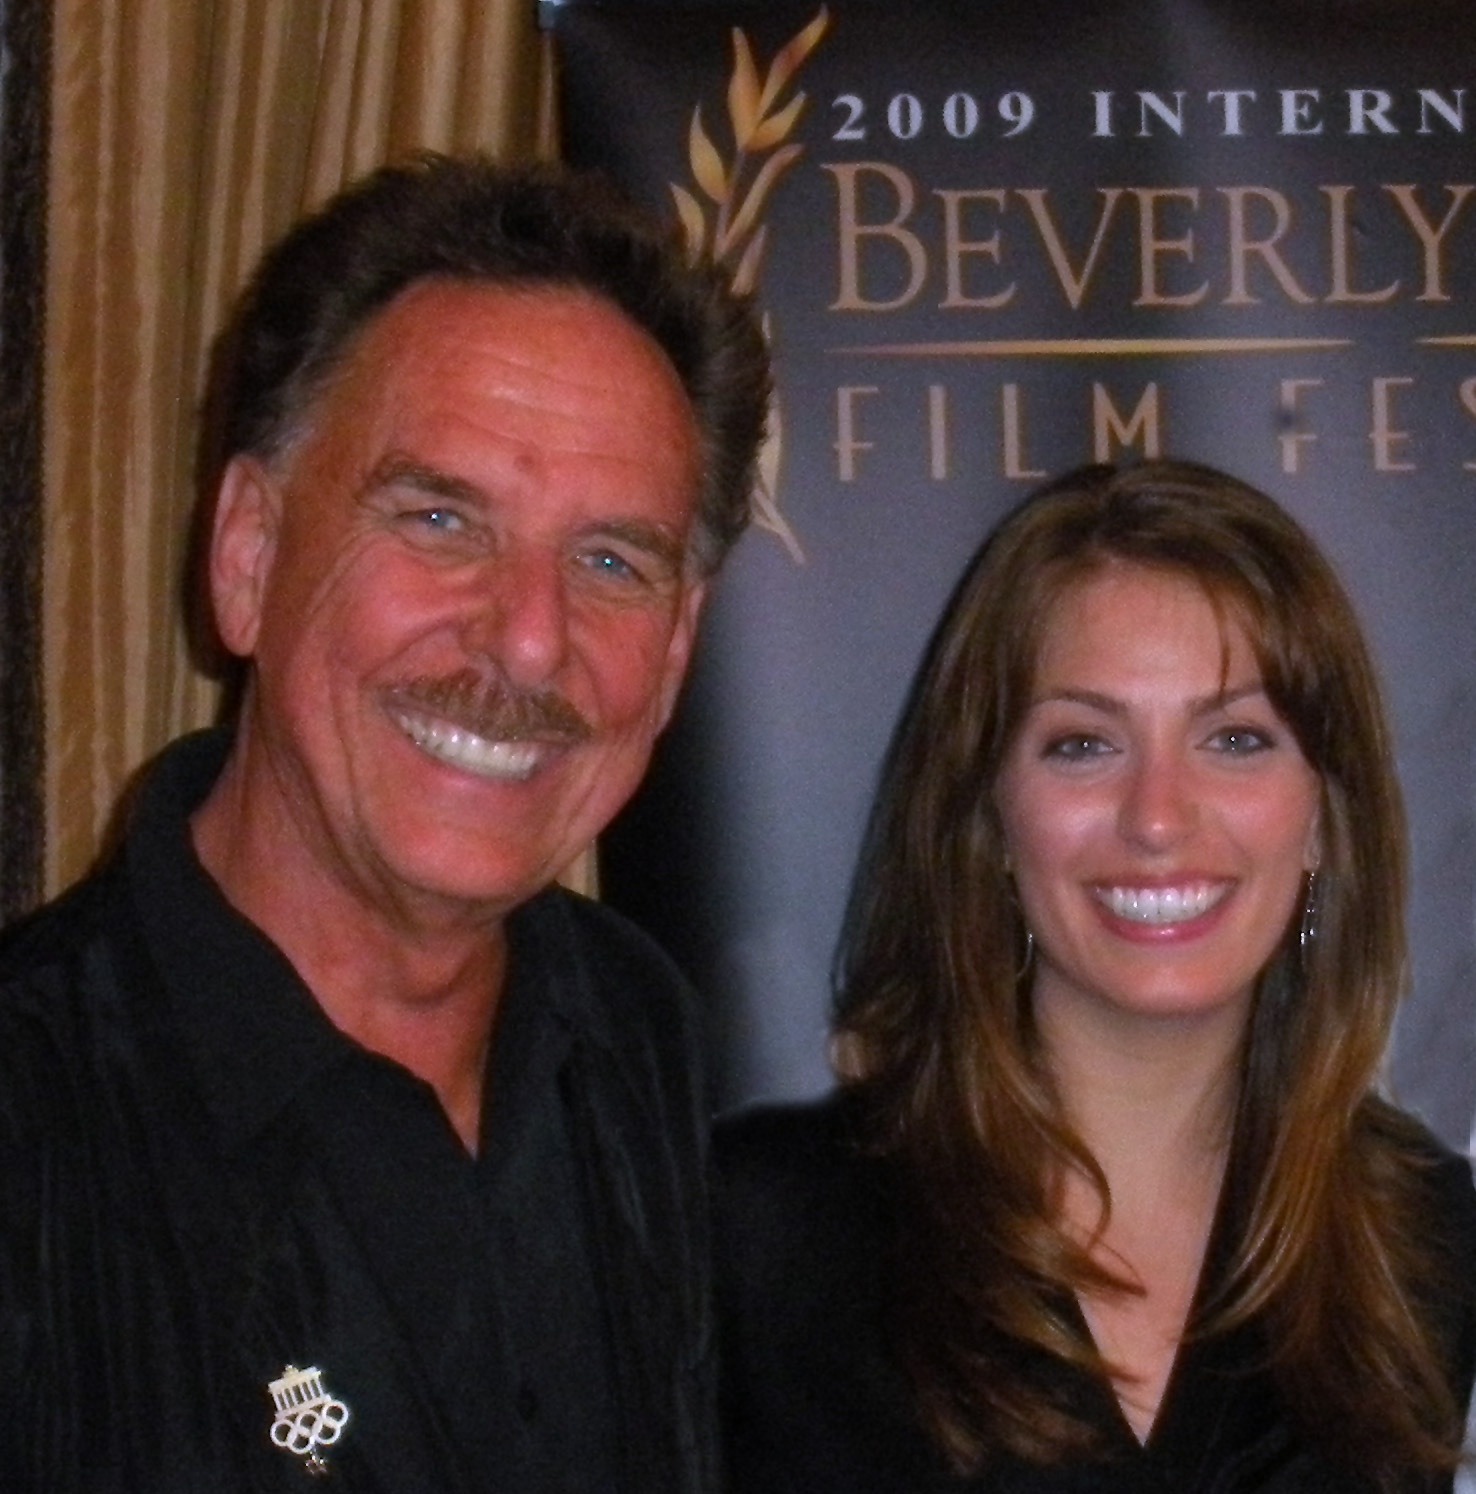 Christopher Canole receiving 2009 Beverly Hills International Film Festival nomination for best screenplay with actress and online host Leah D'Emilio